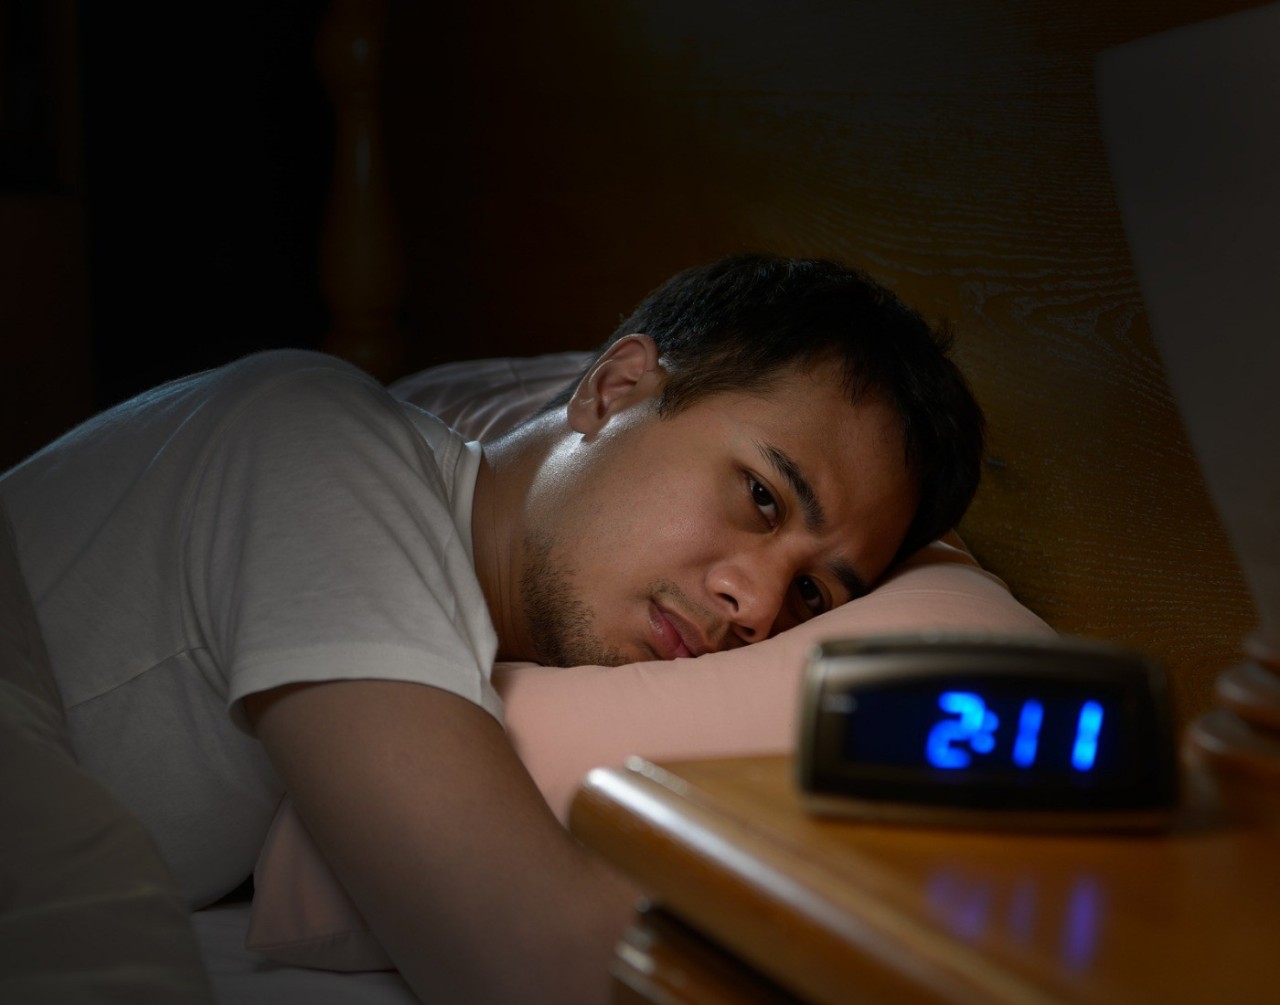 5 Reasons Why a Student Might Have Trouble Sleeping